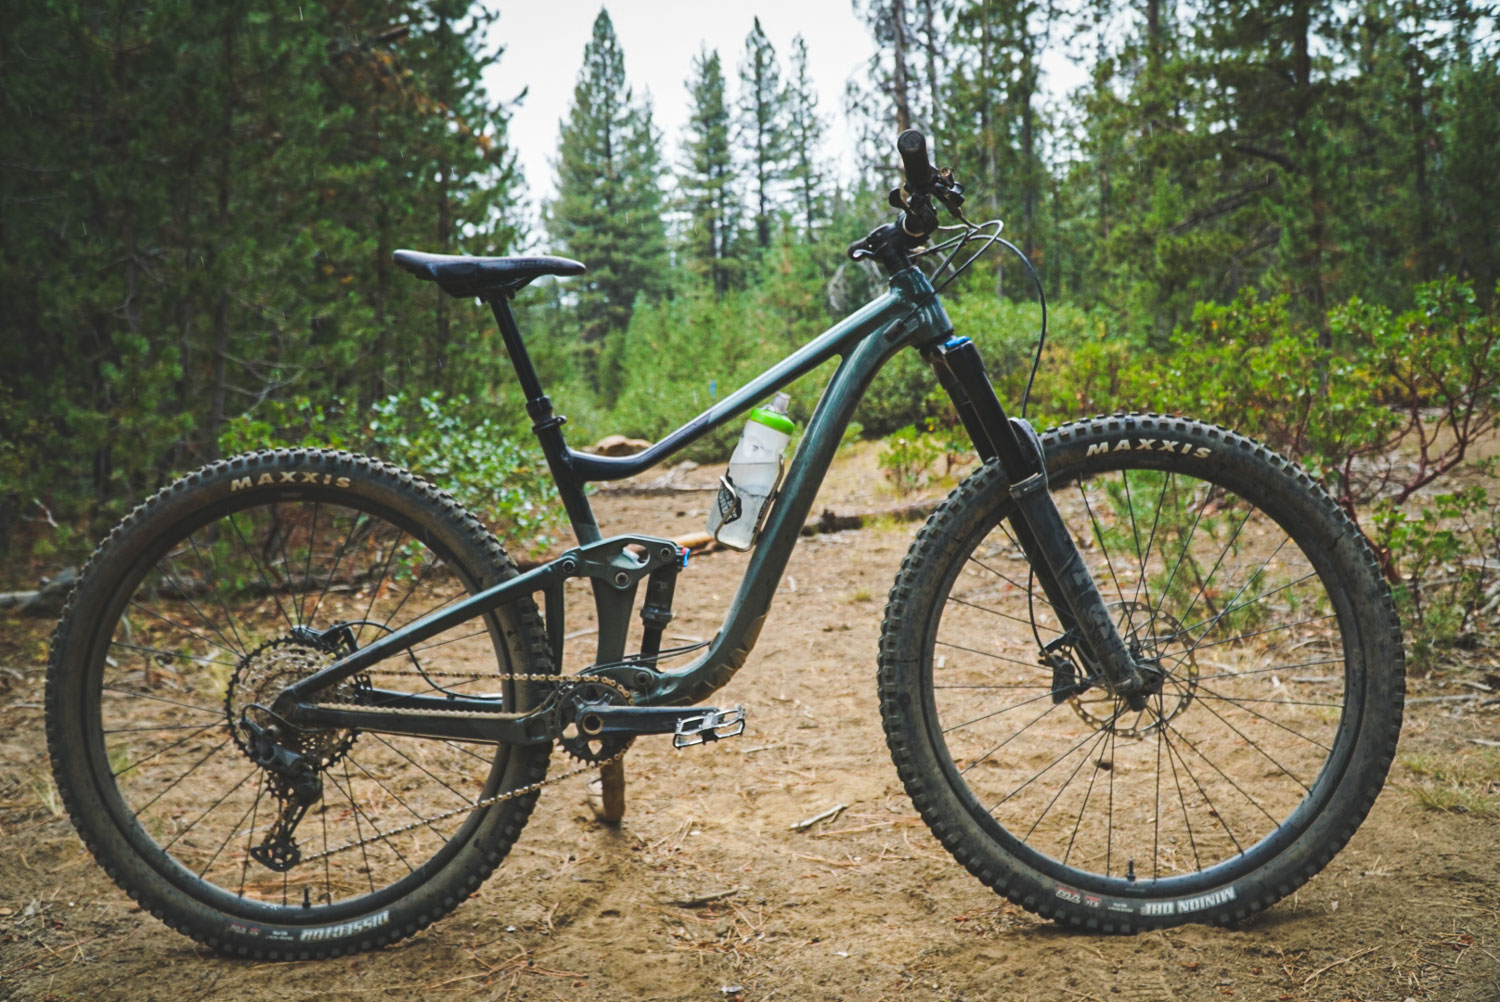 vervolgens Piket magnetron Review: Giant Trance X 29 2 | The Loam Wolf